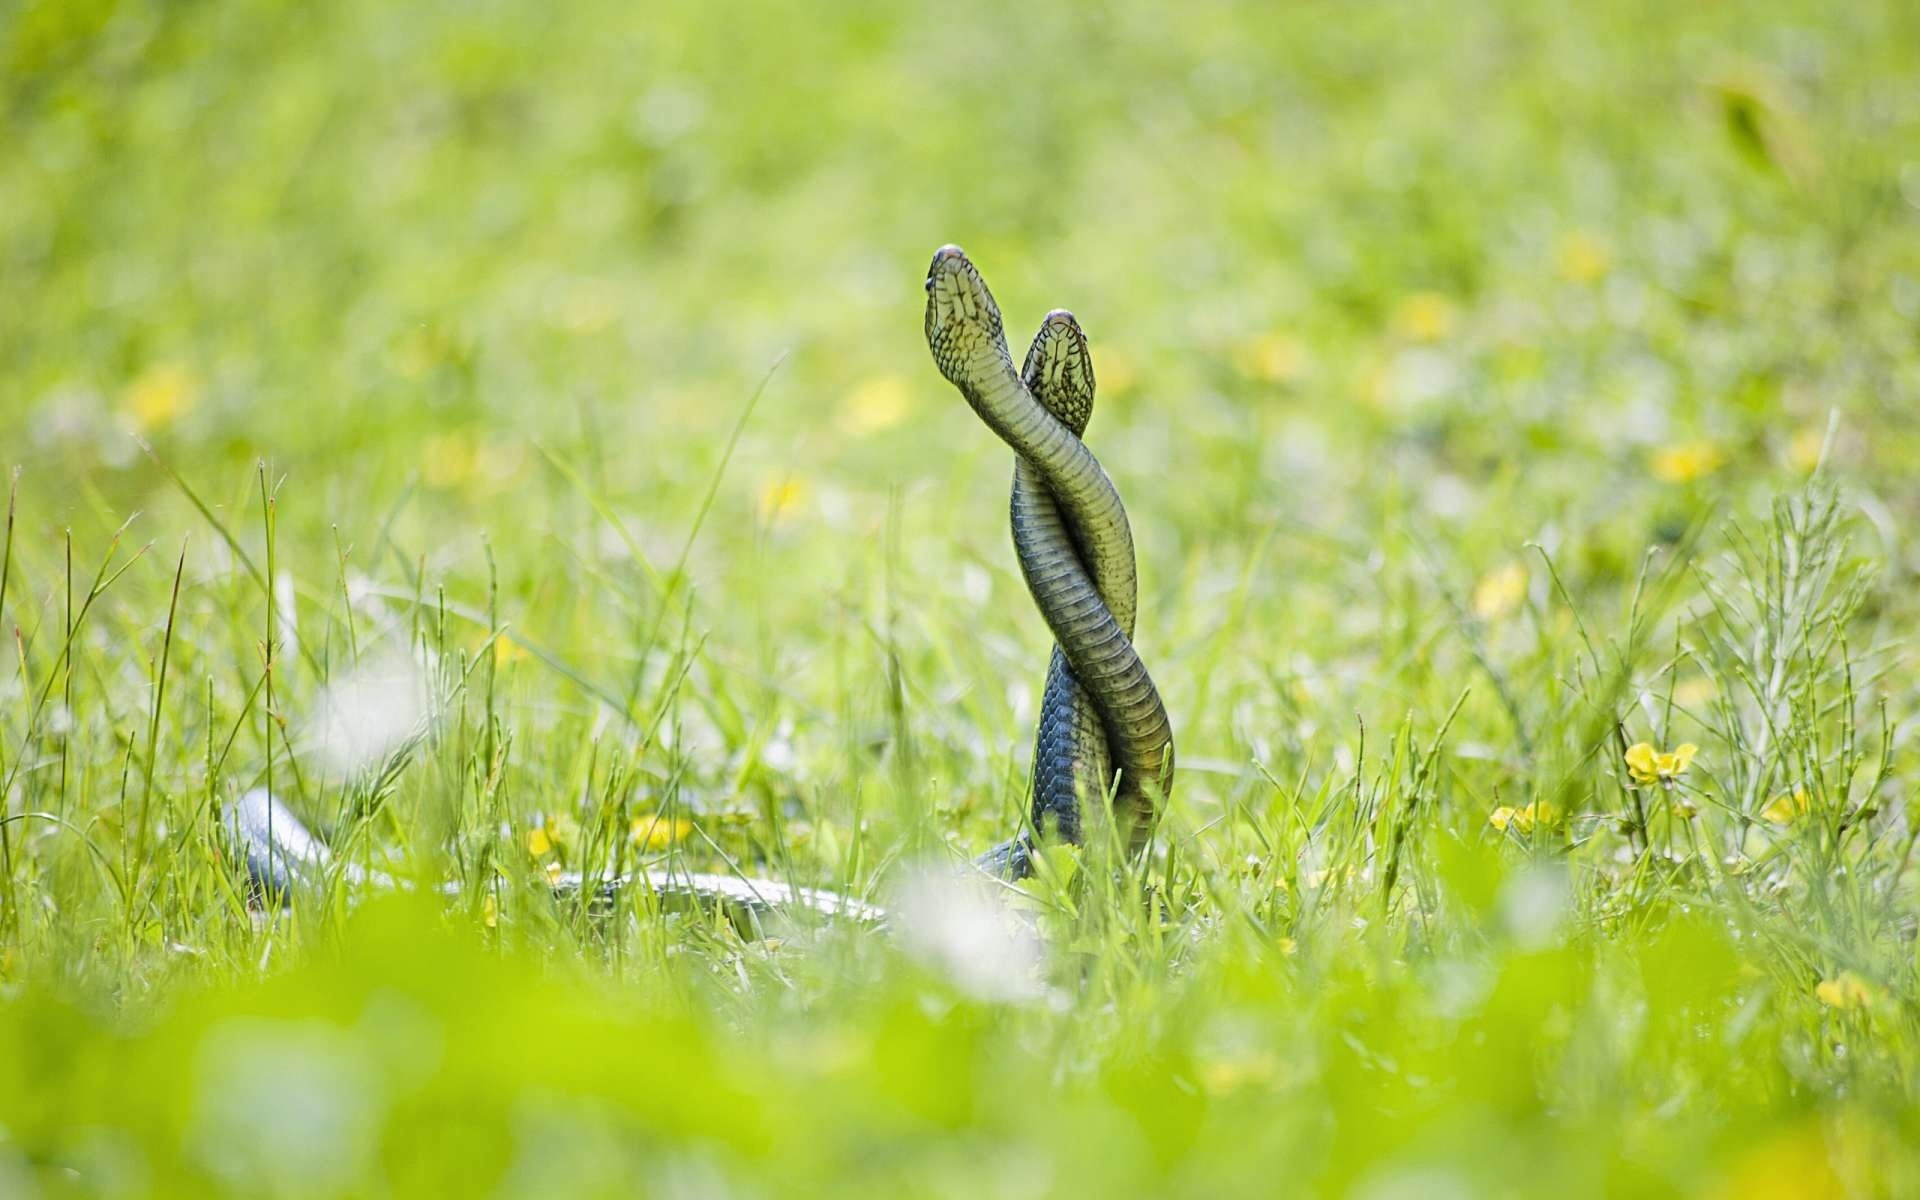 Two Snakes Entwined in the Grass